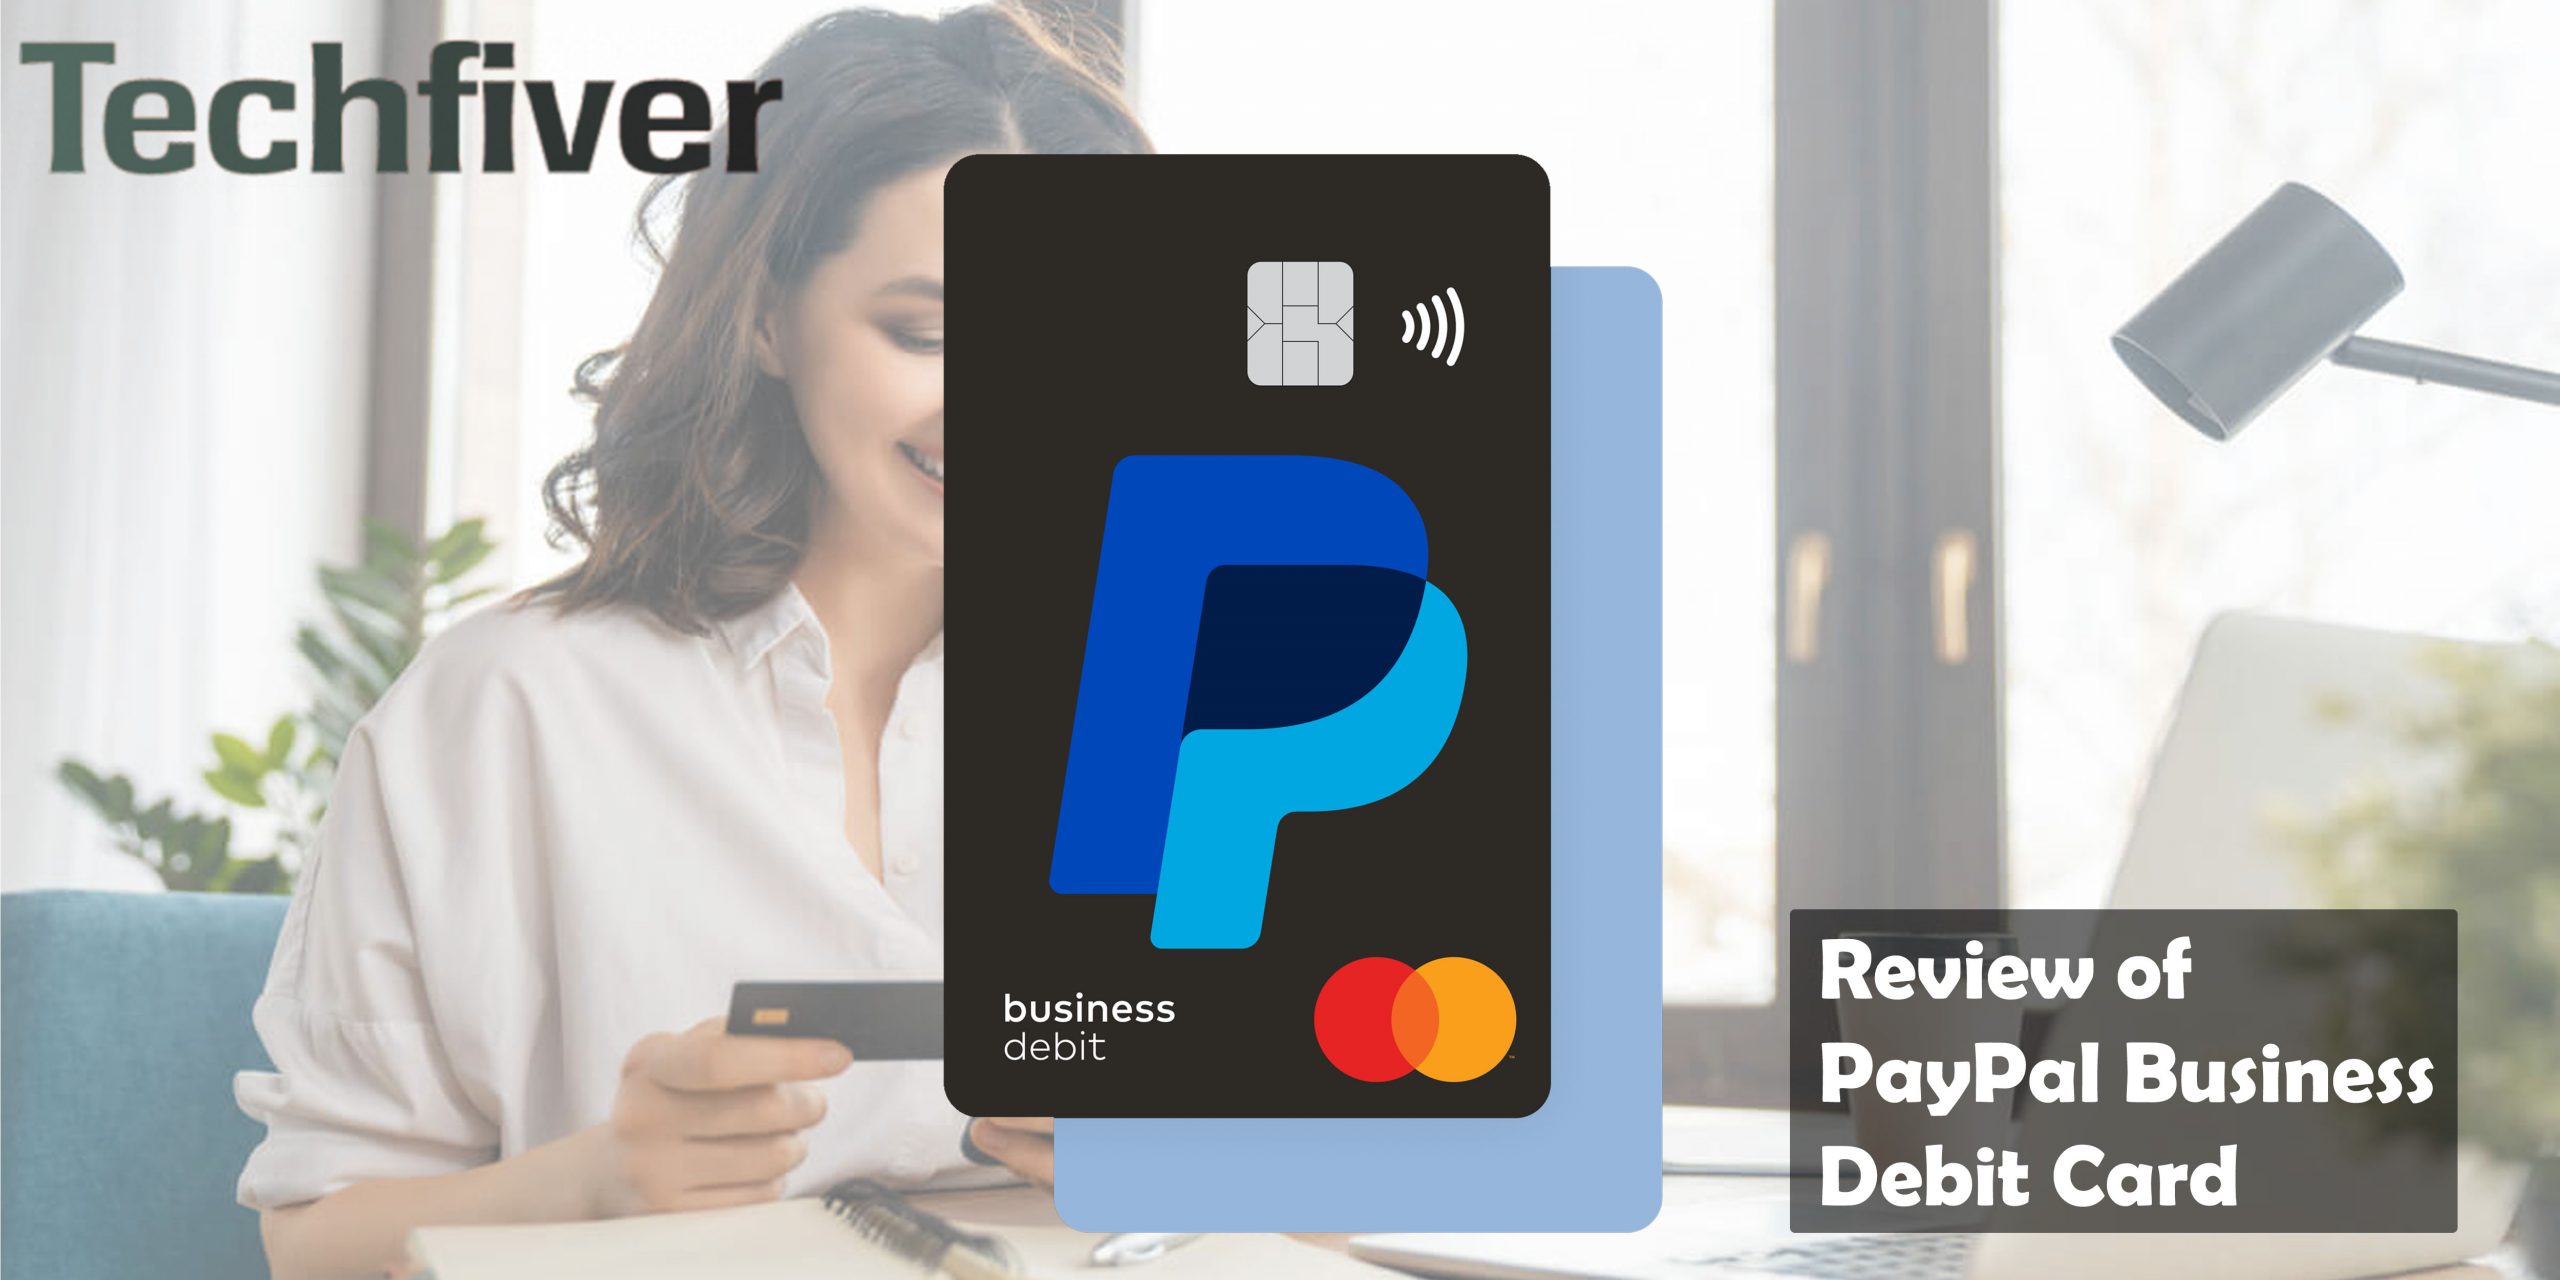 Review of PayPal Business Debit Card